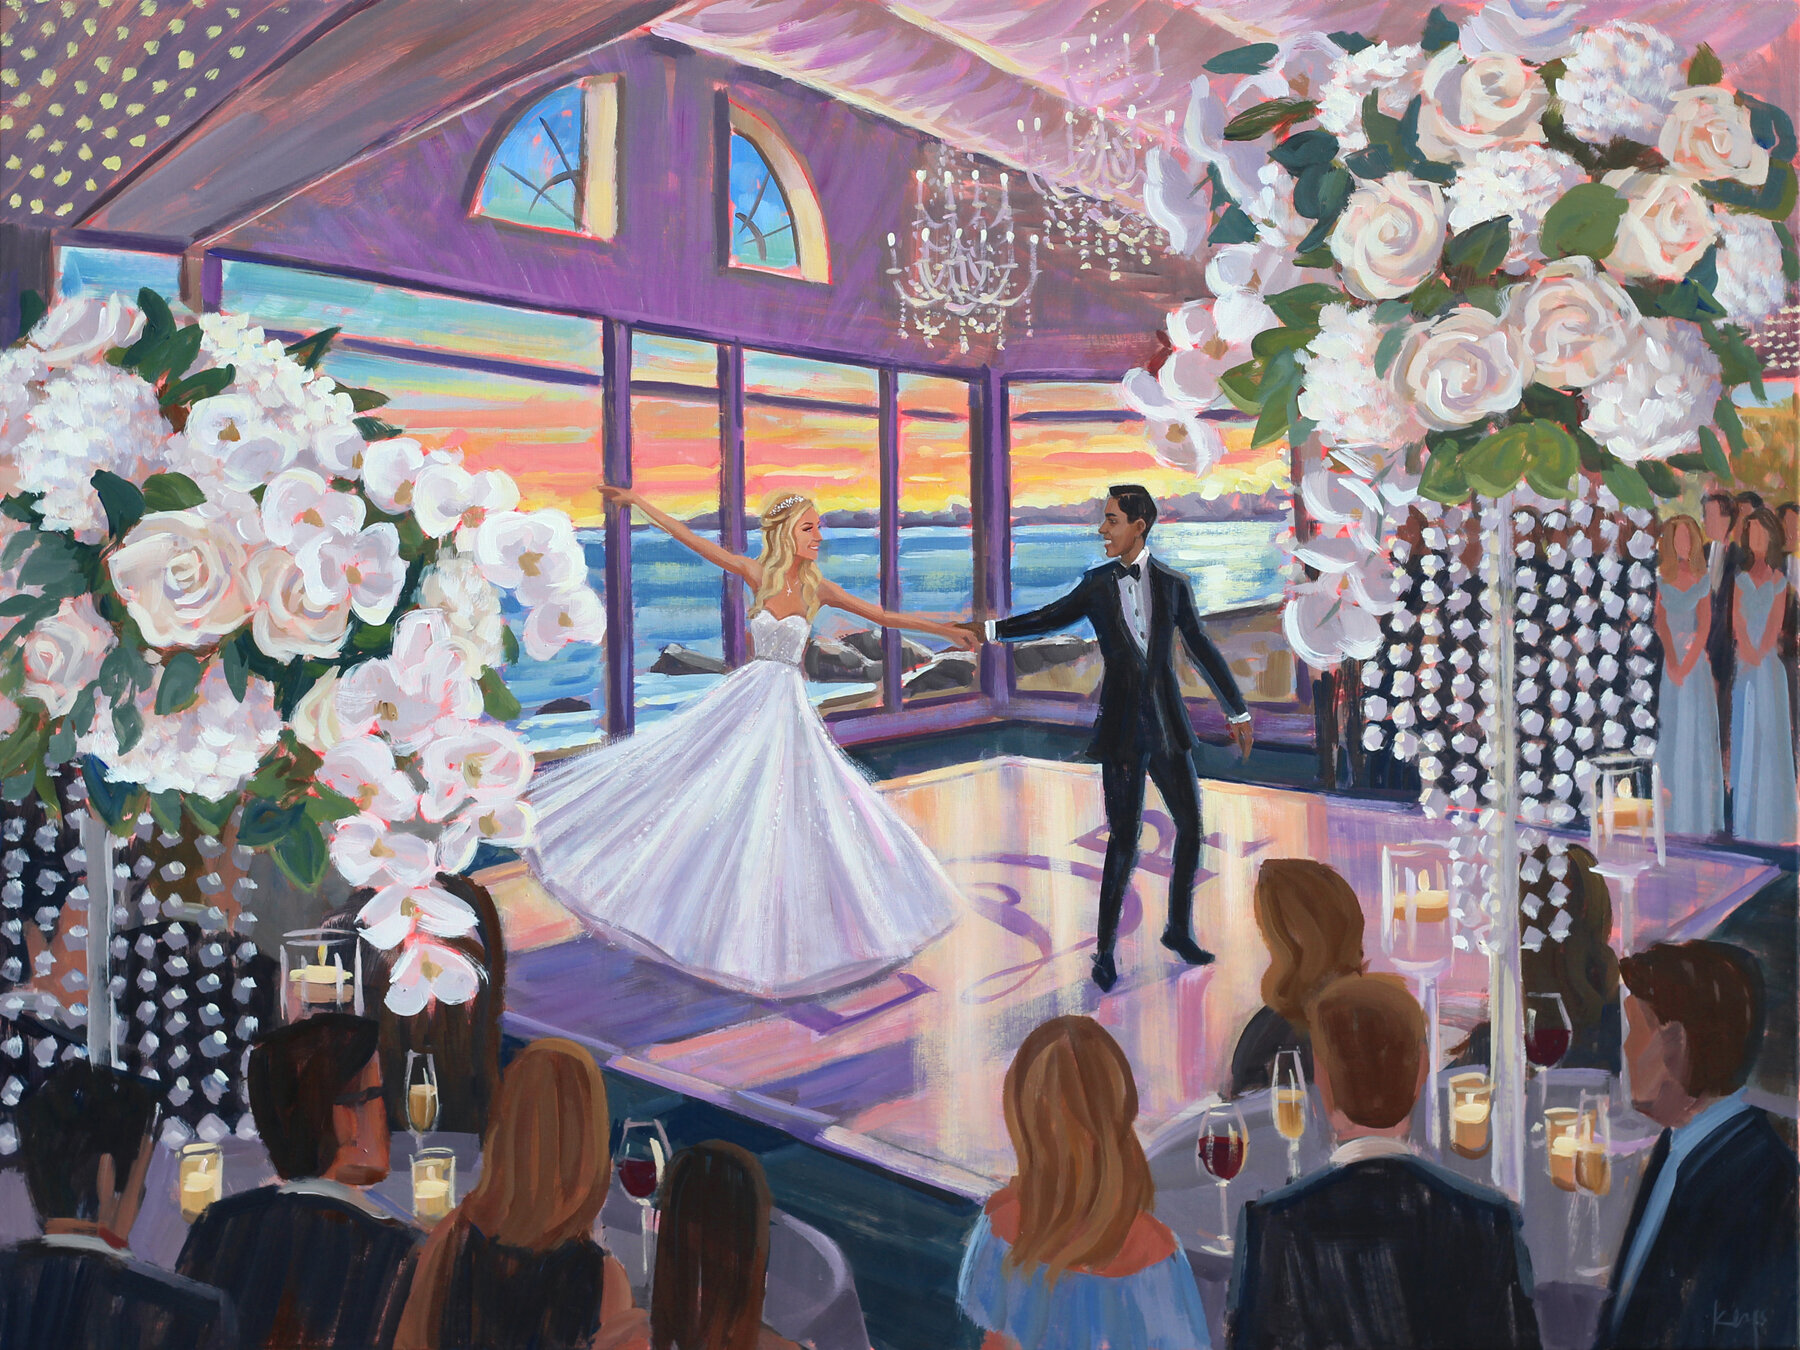 Connecticut’s Wee Burn Beach Club was such a gorgeous setting for Lyubov + Ryan’s reception as captured by live wedding painter, Ben Keys, of Wed on Canvas!